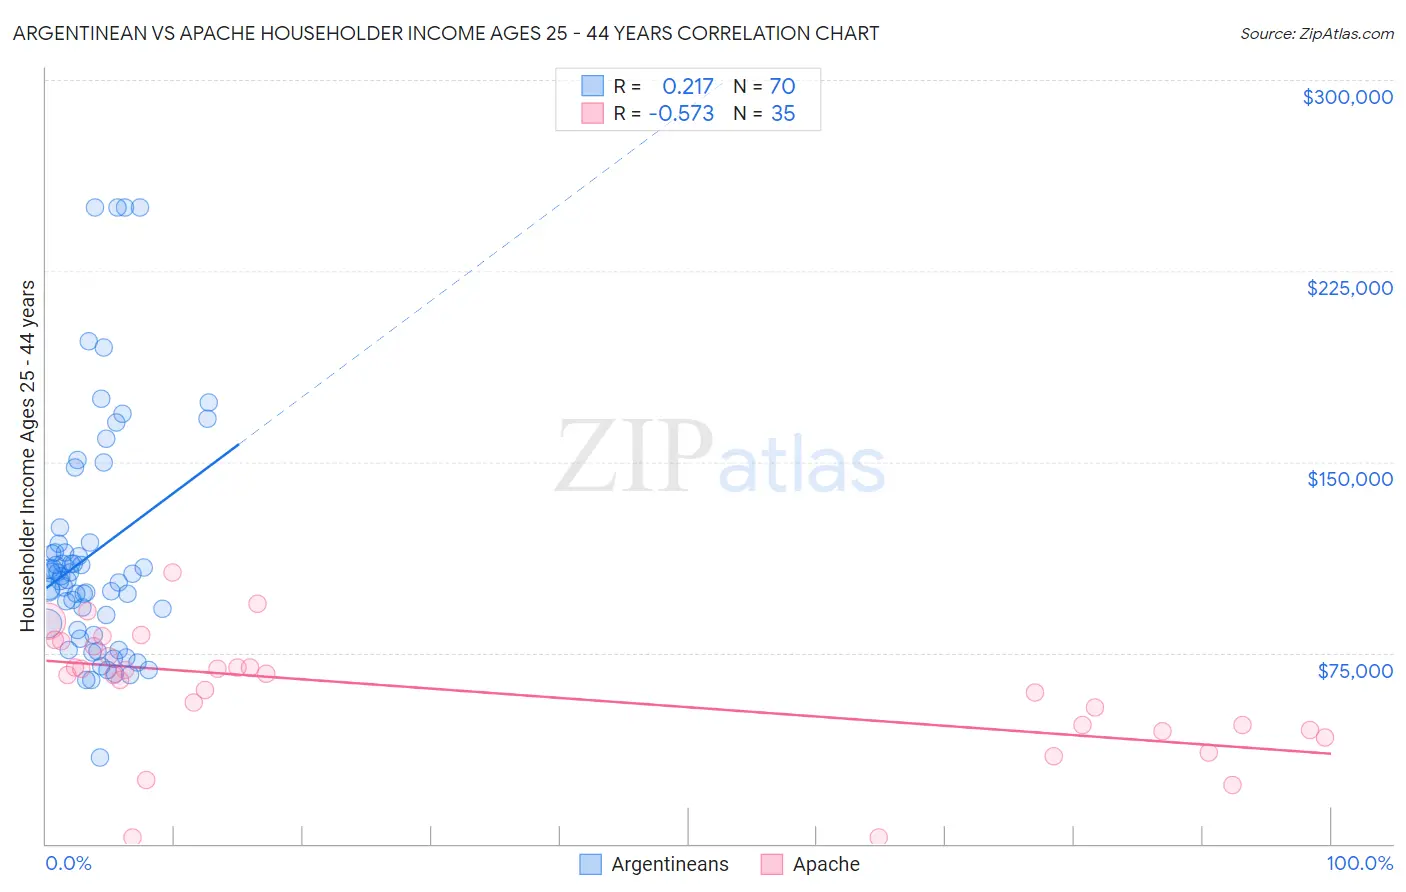 Argentinean vs Apache Householder Income Ages 25 - 44 years